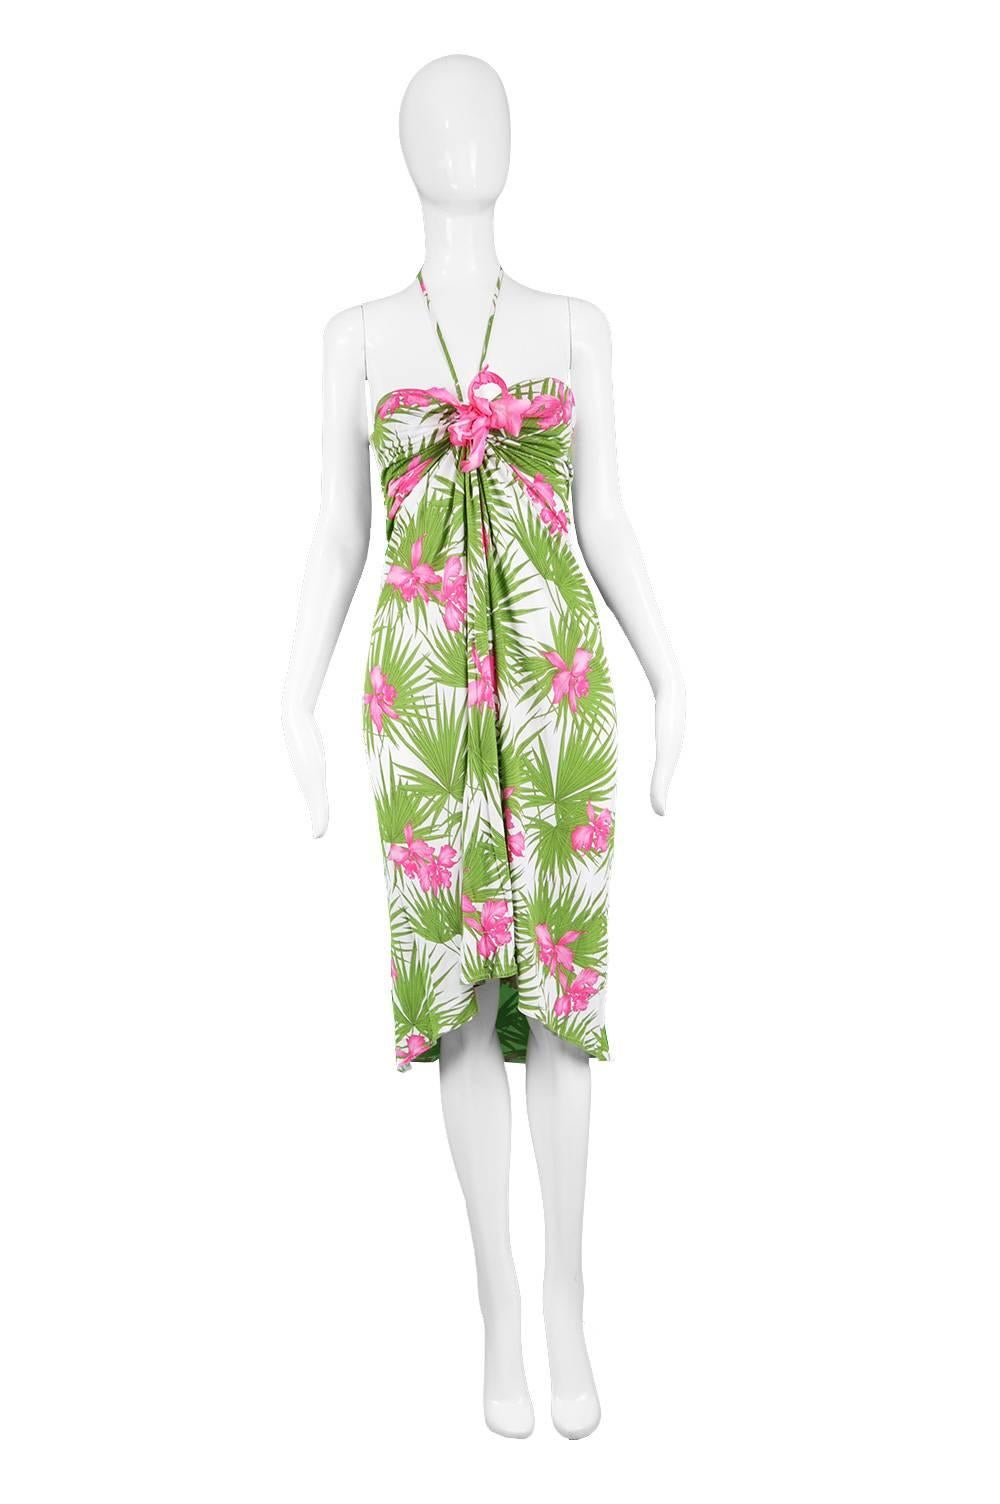 Celine by Michael Kors White Jersey Tropical Halter Dress, S/S 2004

Size: Marked EU 38 which is roughly a UK 10/ US 6. Please check measurements.
Bust - 34” / 86cm
Waist - 28”  / 71cm
Hips - Up to 44” / 112cm
Length (Bust to Hem) - 35” /